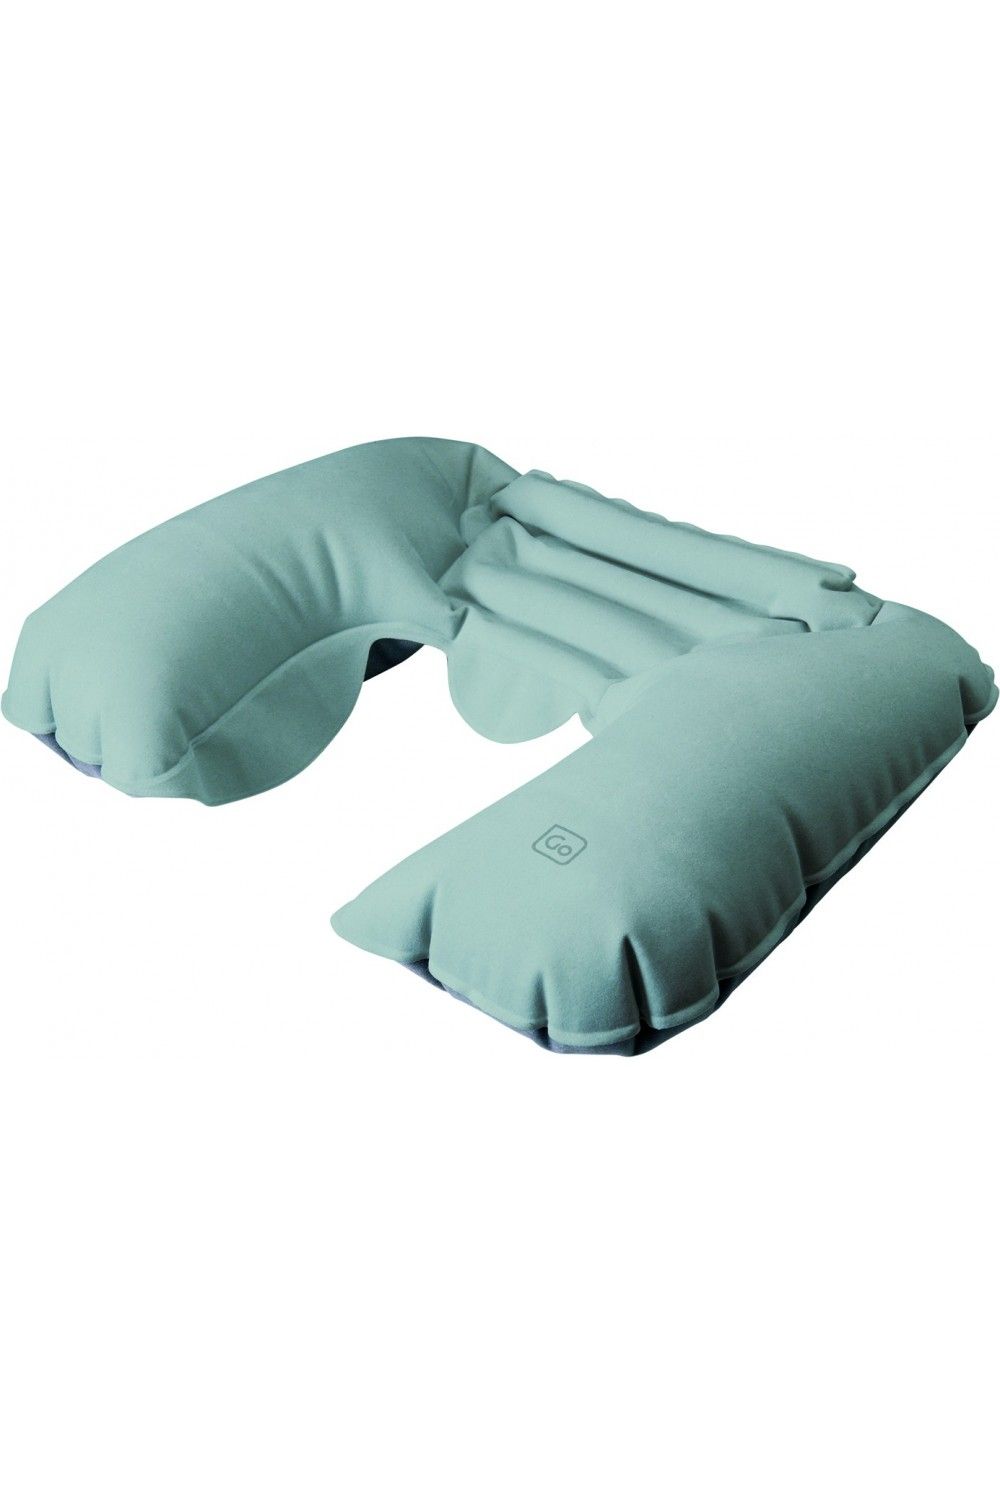 Go Travel inflatable neck pillow "Snoozer"